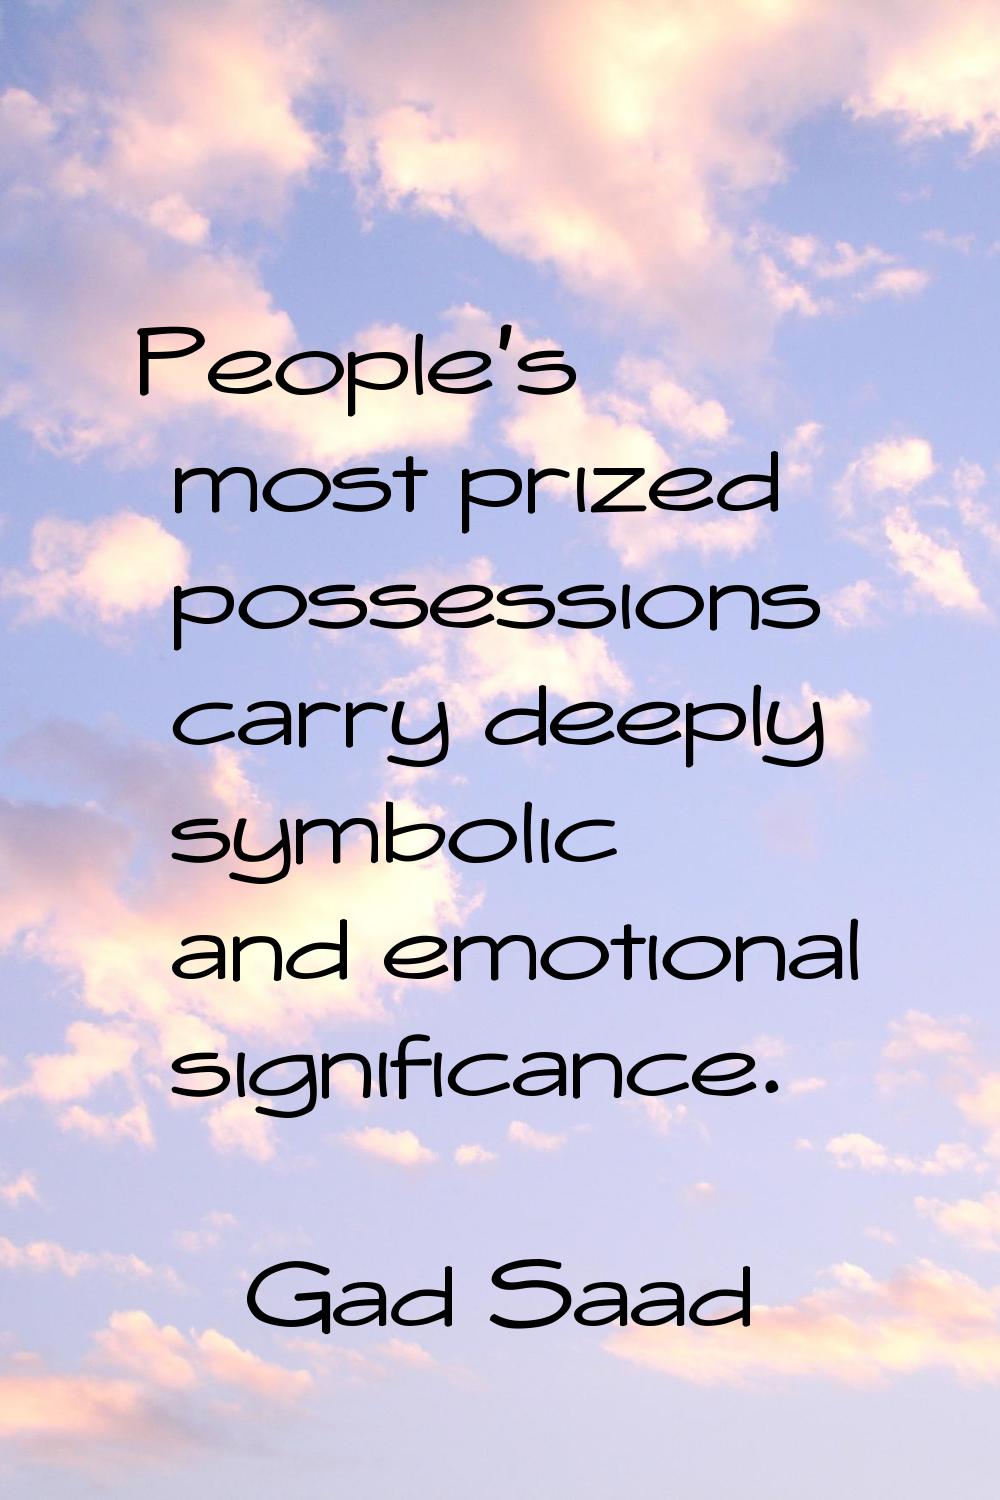 People's most prized possessions carry deeply symbolic and emotional significance.